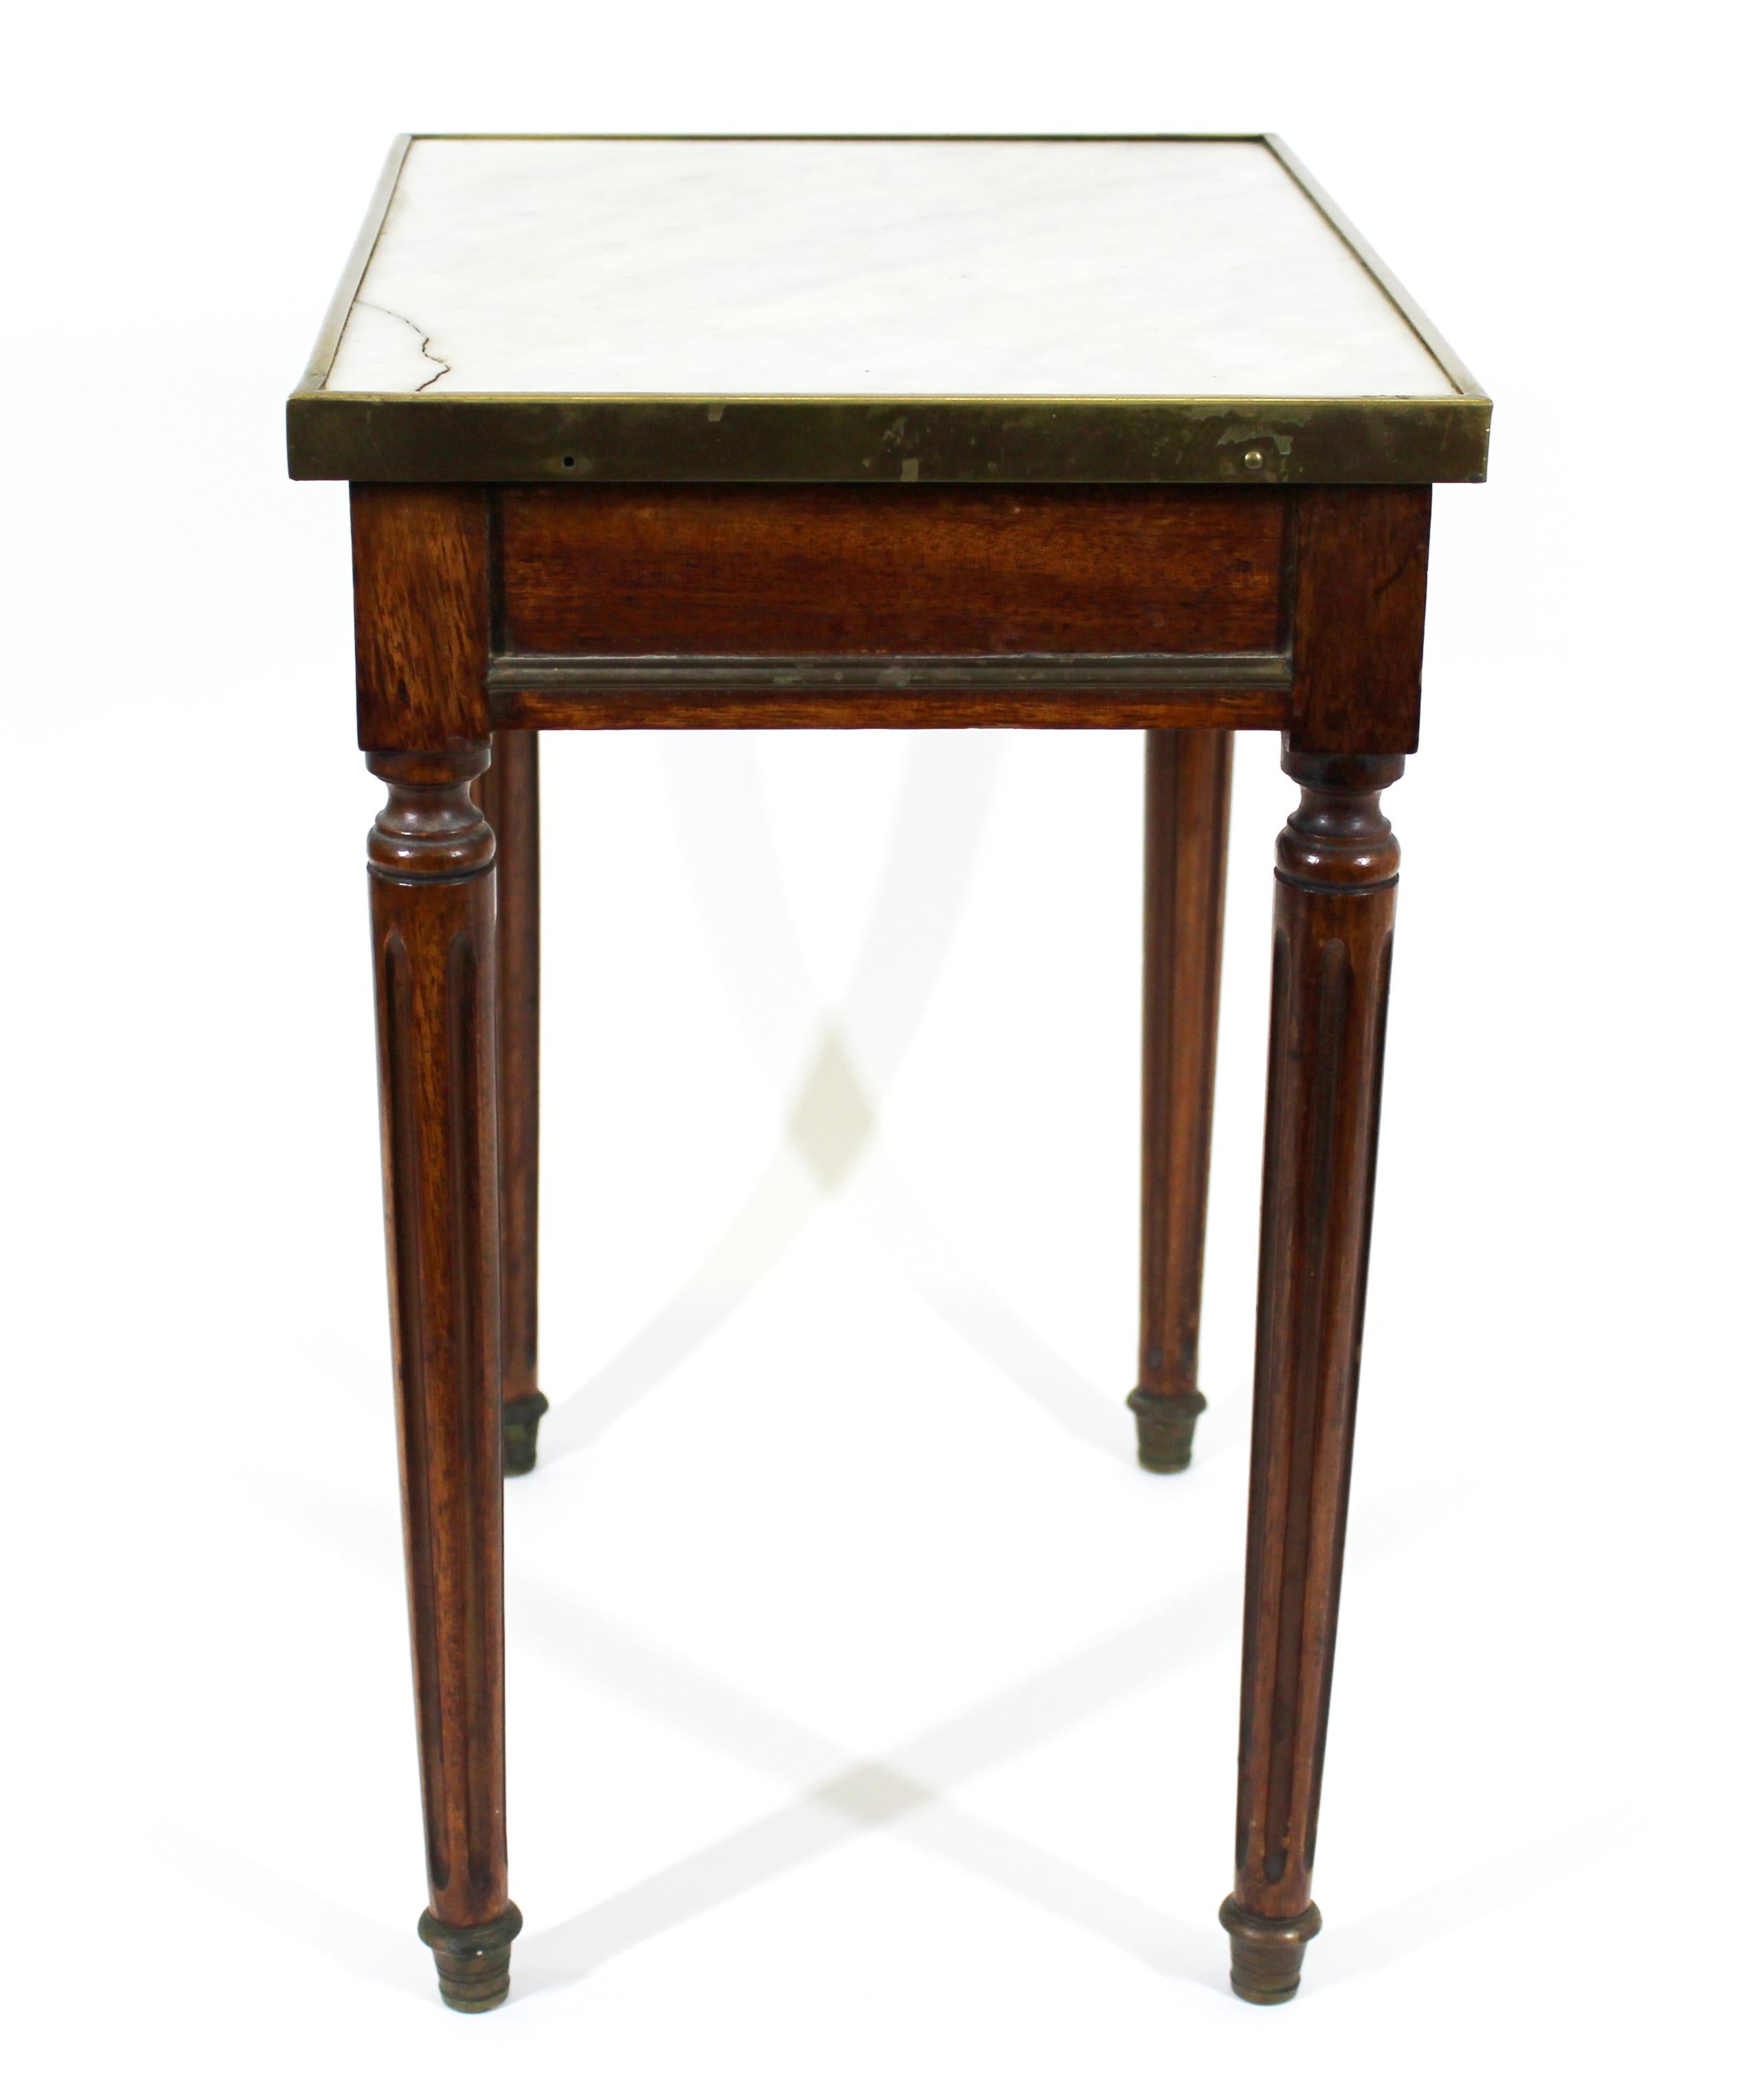 19th Century Continental Diminutive Marble Top Side Table with Drawer